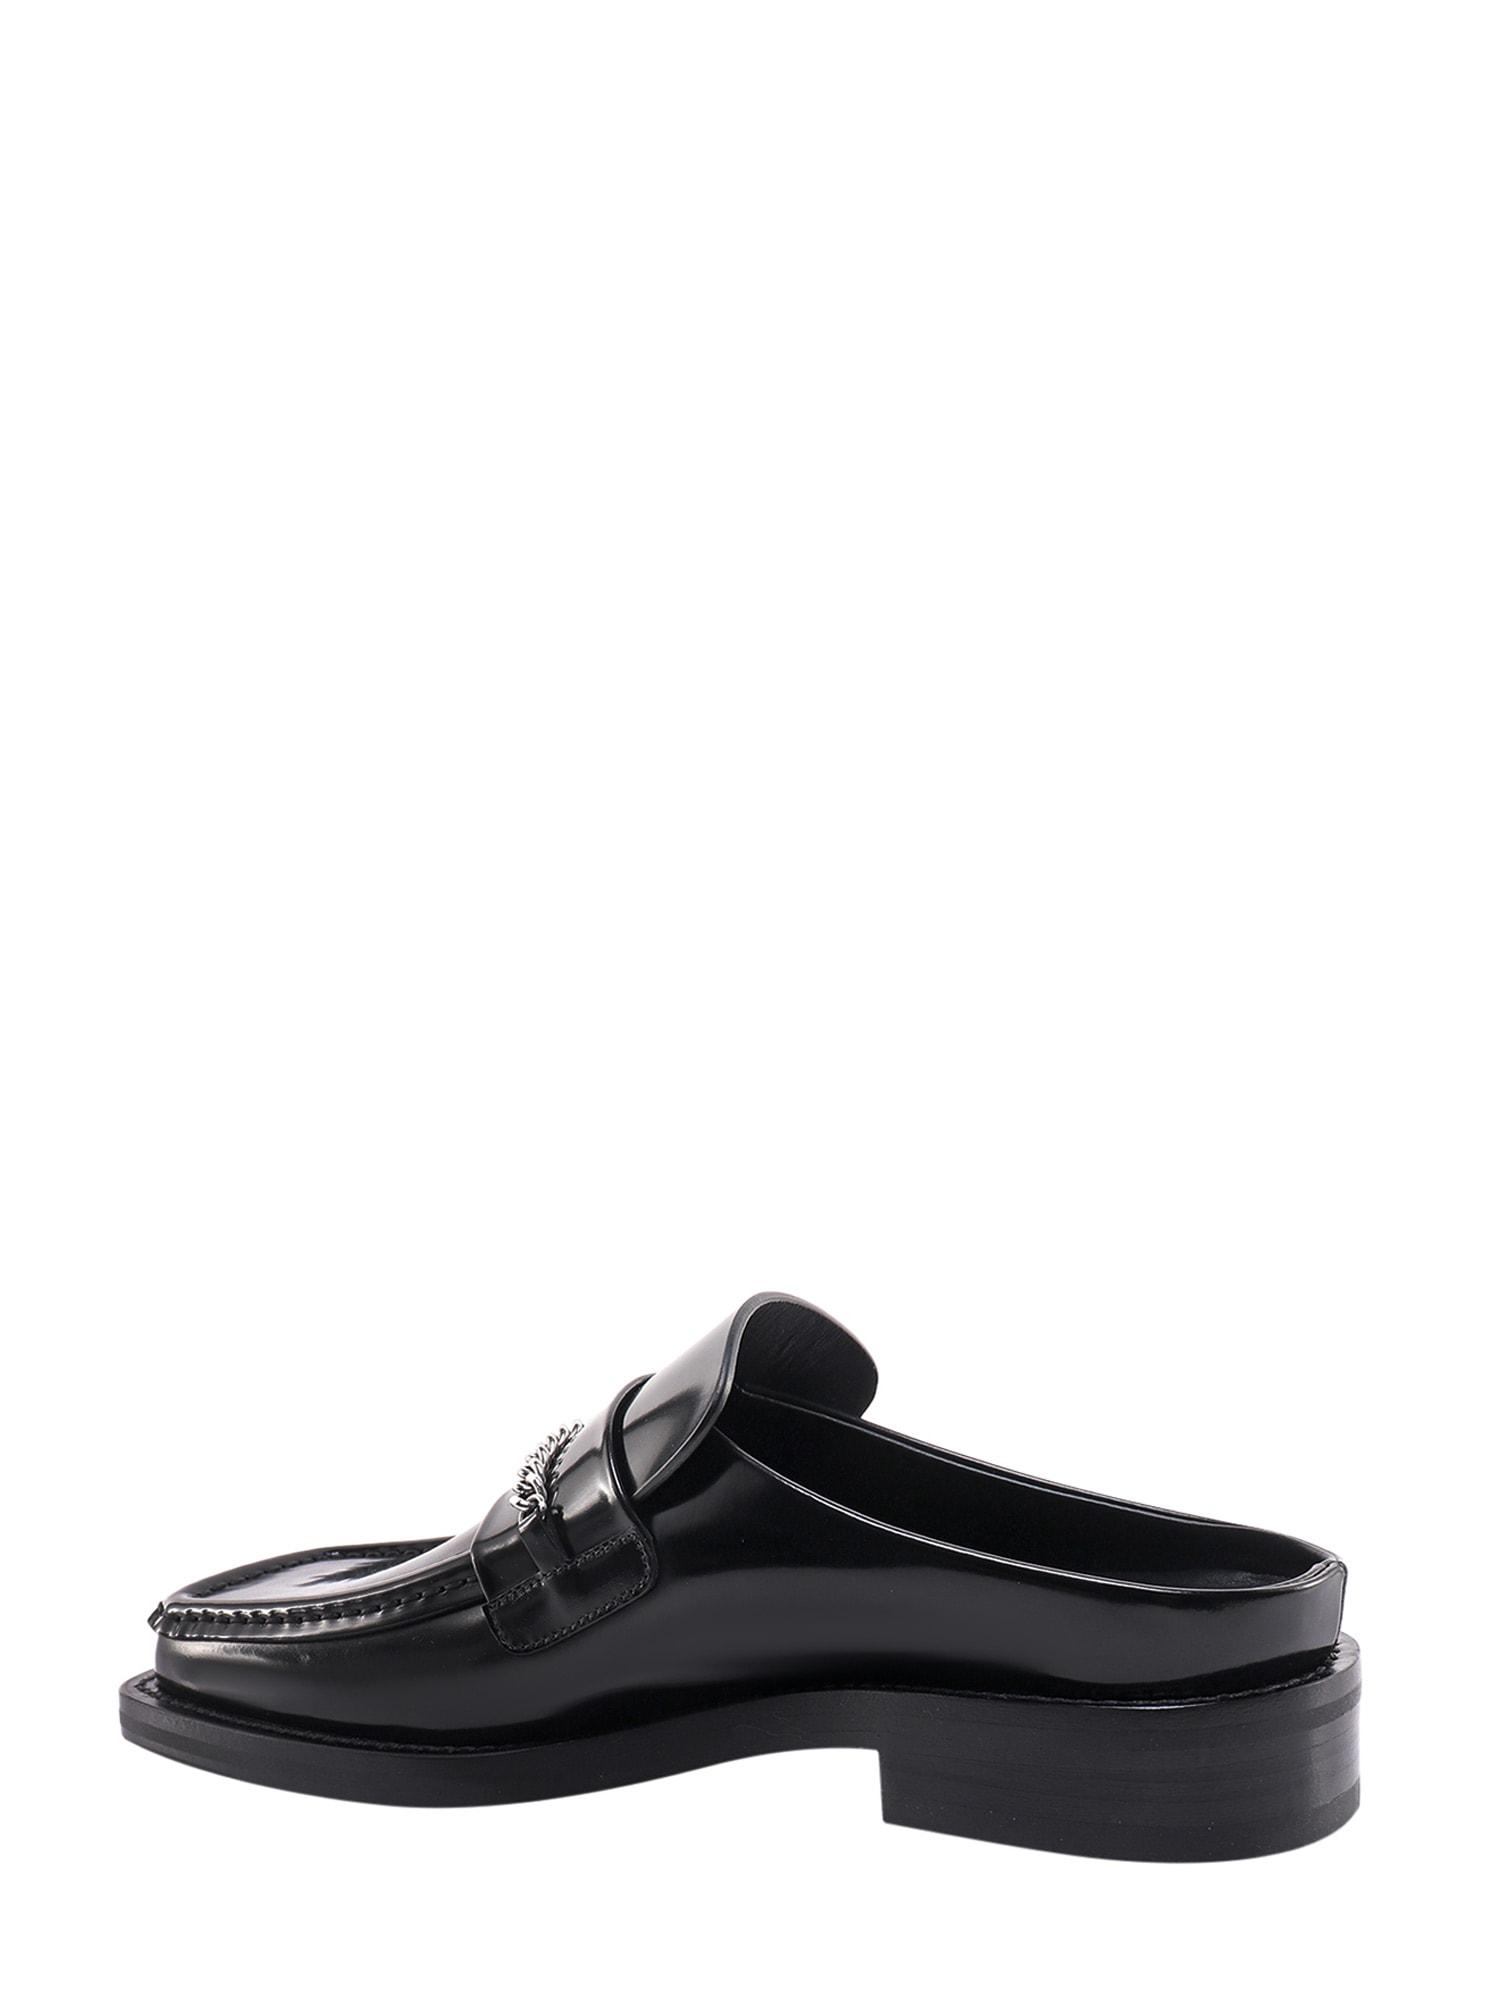 Mens Shoes Slip-on shoes Monk shoes Martine Rose Leather Mules & Clogs in Black for Men 